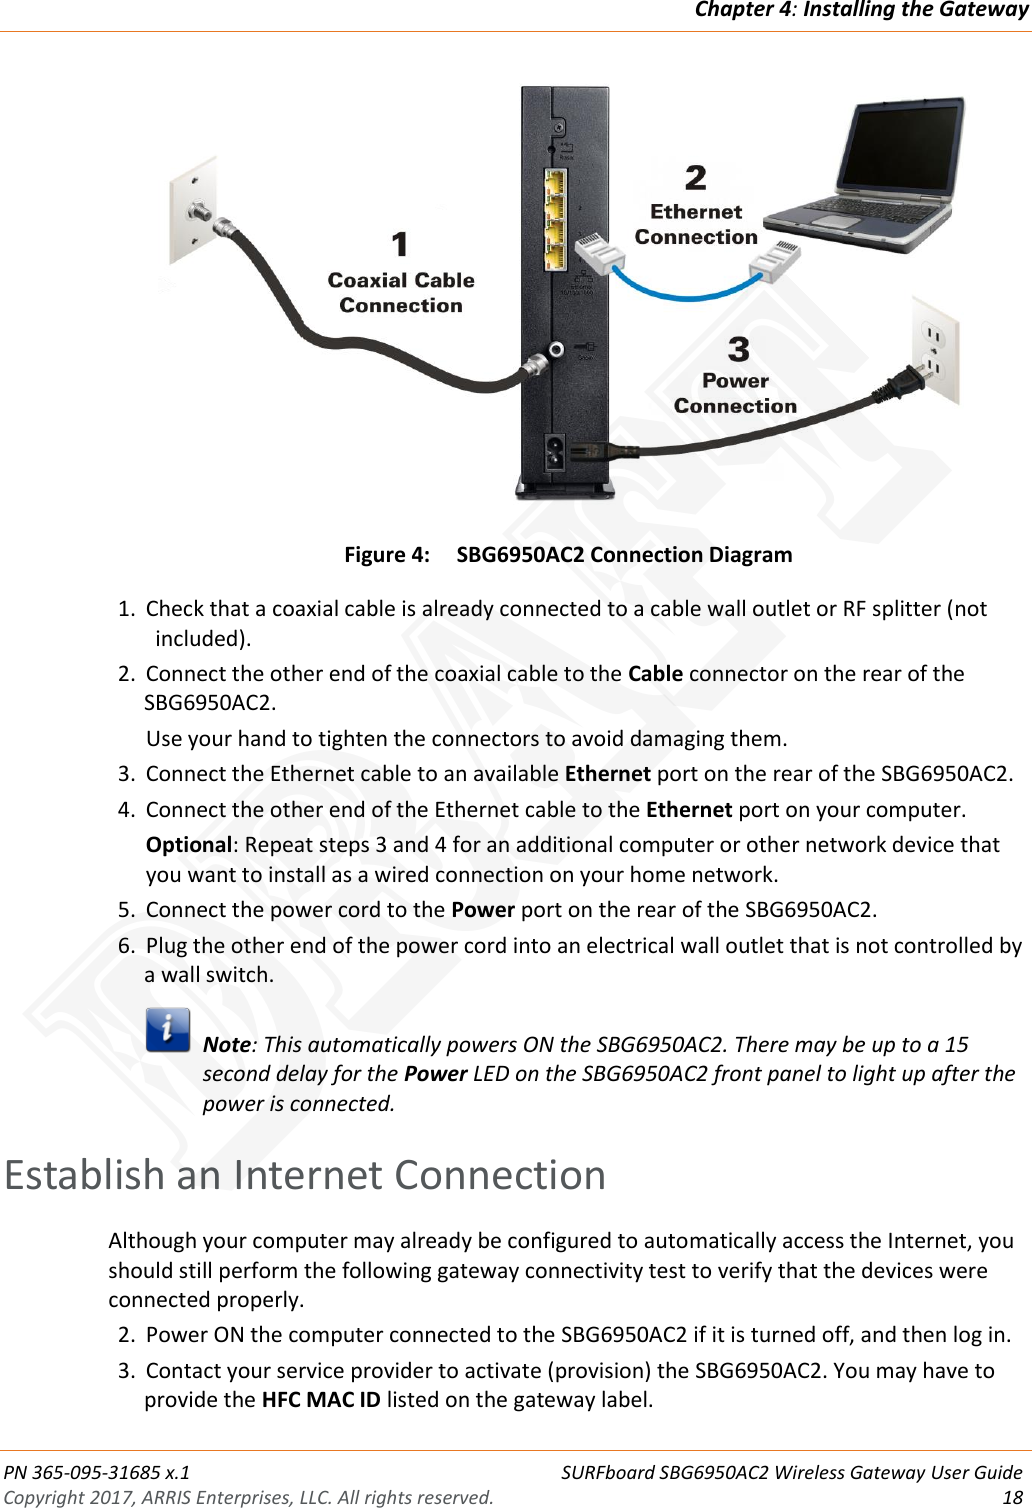 Chapter 4: Installing the Gateway  PN 365-095-31685 x.1 SURFboard SBG6950AC2 Wireless Gateway User Guide Copyright 2017, ARRIS Enterprises, LLC. All rights reserved.    18   Figure 4: SBG6950AC2 Connection Diagram 1. Check that a coaxial cable is already connected to a cable wall outlet or RF splitter (not included). 2. Connect the other end of the coaxial cable to the Cable connector on the rear of the SBG6950AC2. Use your hand to tighten the connectors to avoid damaging them. 3. Connect the Ethernet cable to an available Ethernet port on the rear of the SBG6950AC2. 4. Connect the other end of the Ethernet cable to the Ethernet port on your computer. Optional: Repeat steps 3 and 4 for an additional computer or other network device that you want to install as a wired connection on your home network. 5. Connect the power cord to the Power port on the rear of the SBG6950AC2. 6. Plug the other end of the power cord into an electrical wall outlet that is not controlled by a wall switch.   Note: This automatically powers ON the SBG6950AC2. There may be up to a 15 second delay for the Power LED on the SBG6950AC2 front panel to light up after the power is connected.   Establish an Internet Connection Although your computer may already be configured to automatically access the Internet, you should still perform the following gateway connectivity test to verify that the devices were connected properly. 2. Power ON the computer connected to the SBG6950AC2 if it is turned off, and then log in. 3. Contact your service provider to activate (provision) the SBG6950AC2. You may have to provide the HFC MAC ID listed on the gateway label. DRAFT